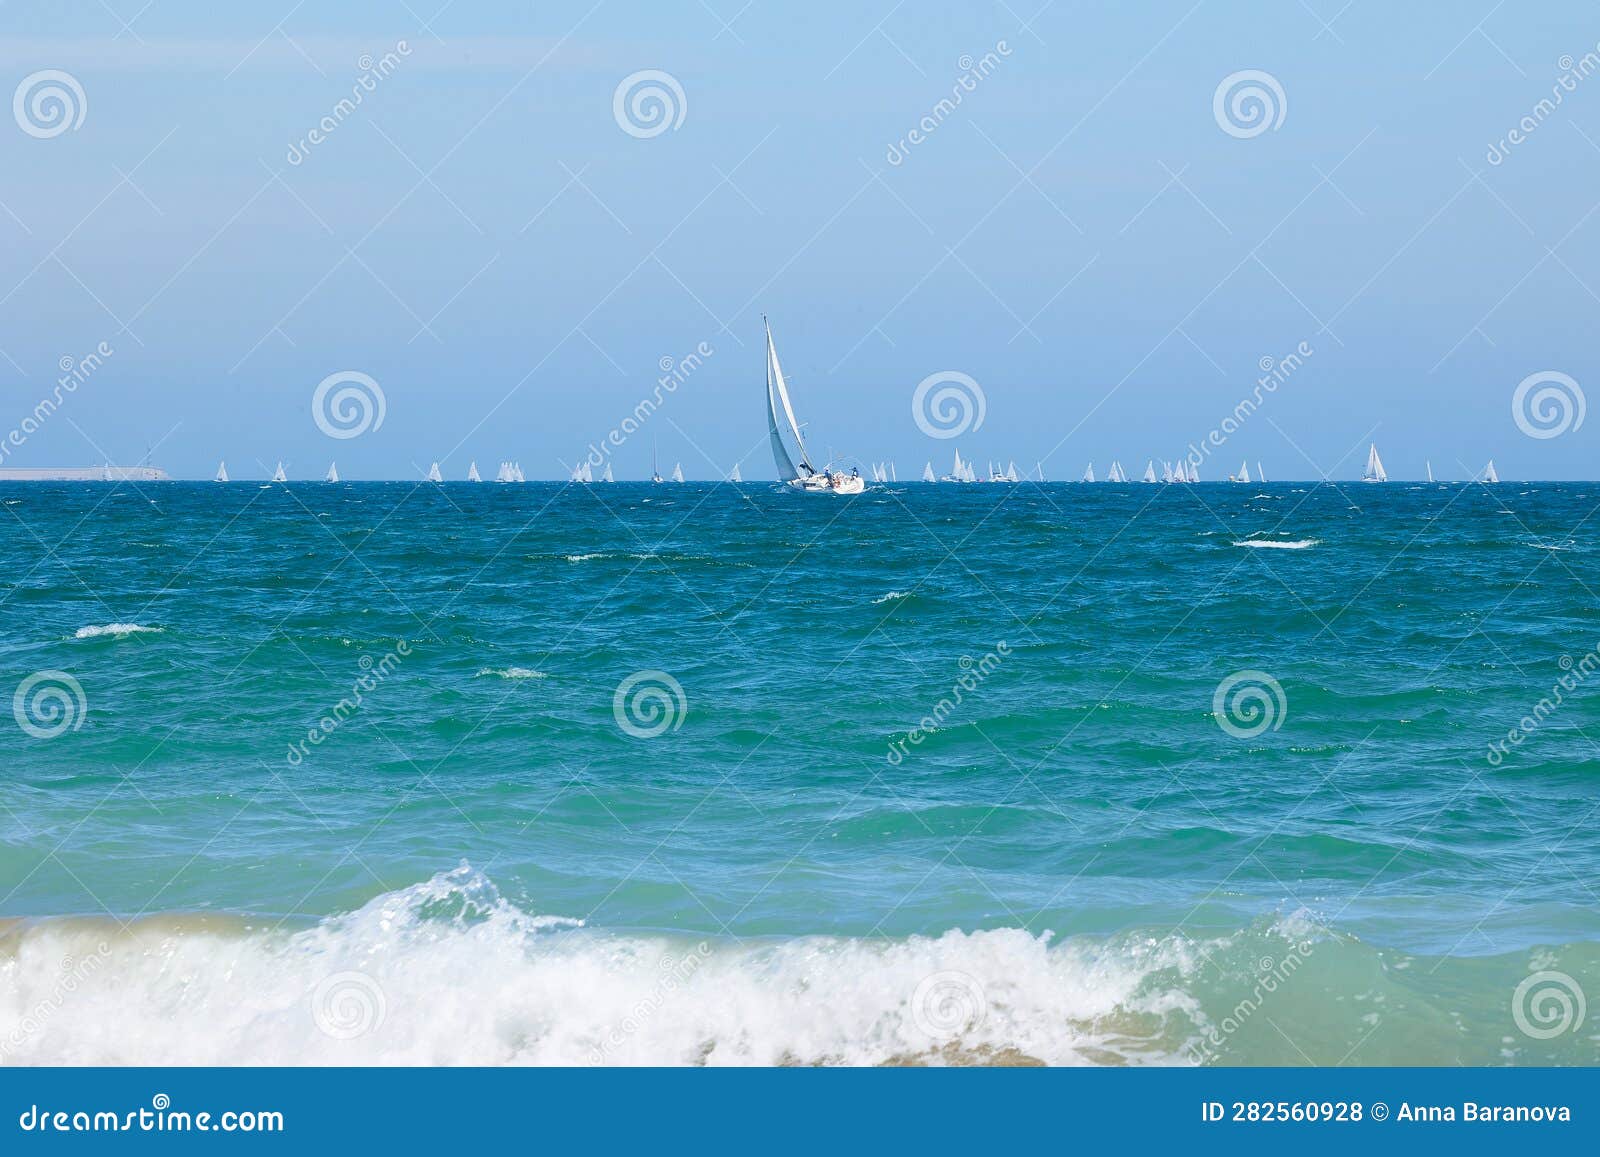 blue sea, clear skies and a lot of sailboats